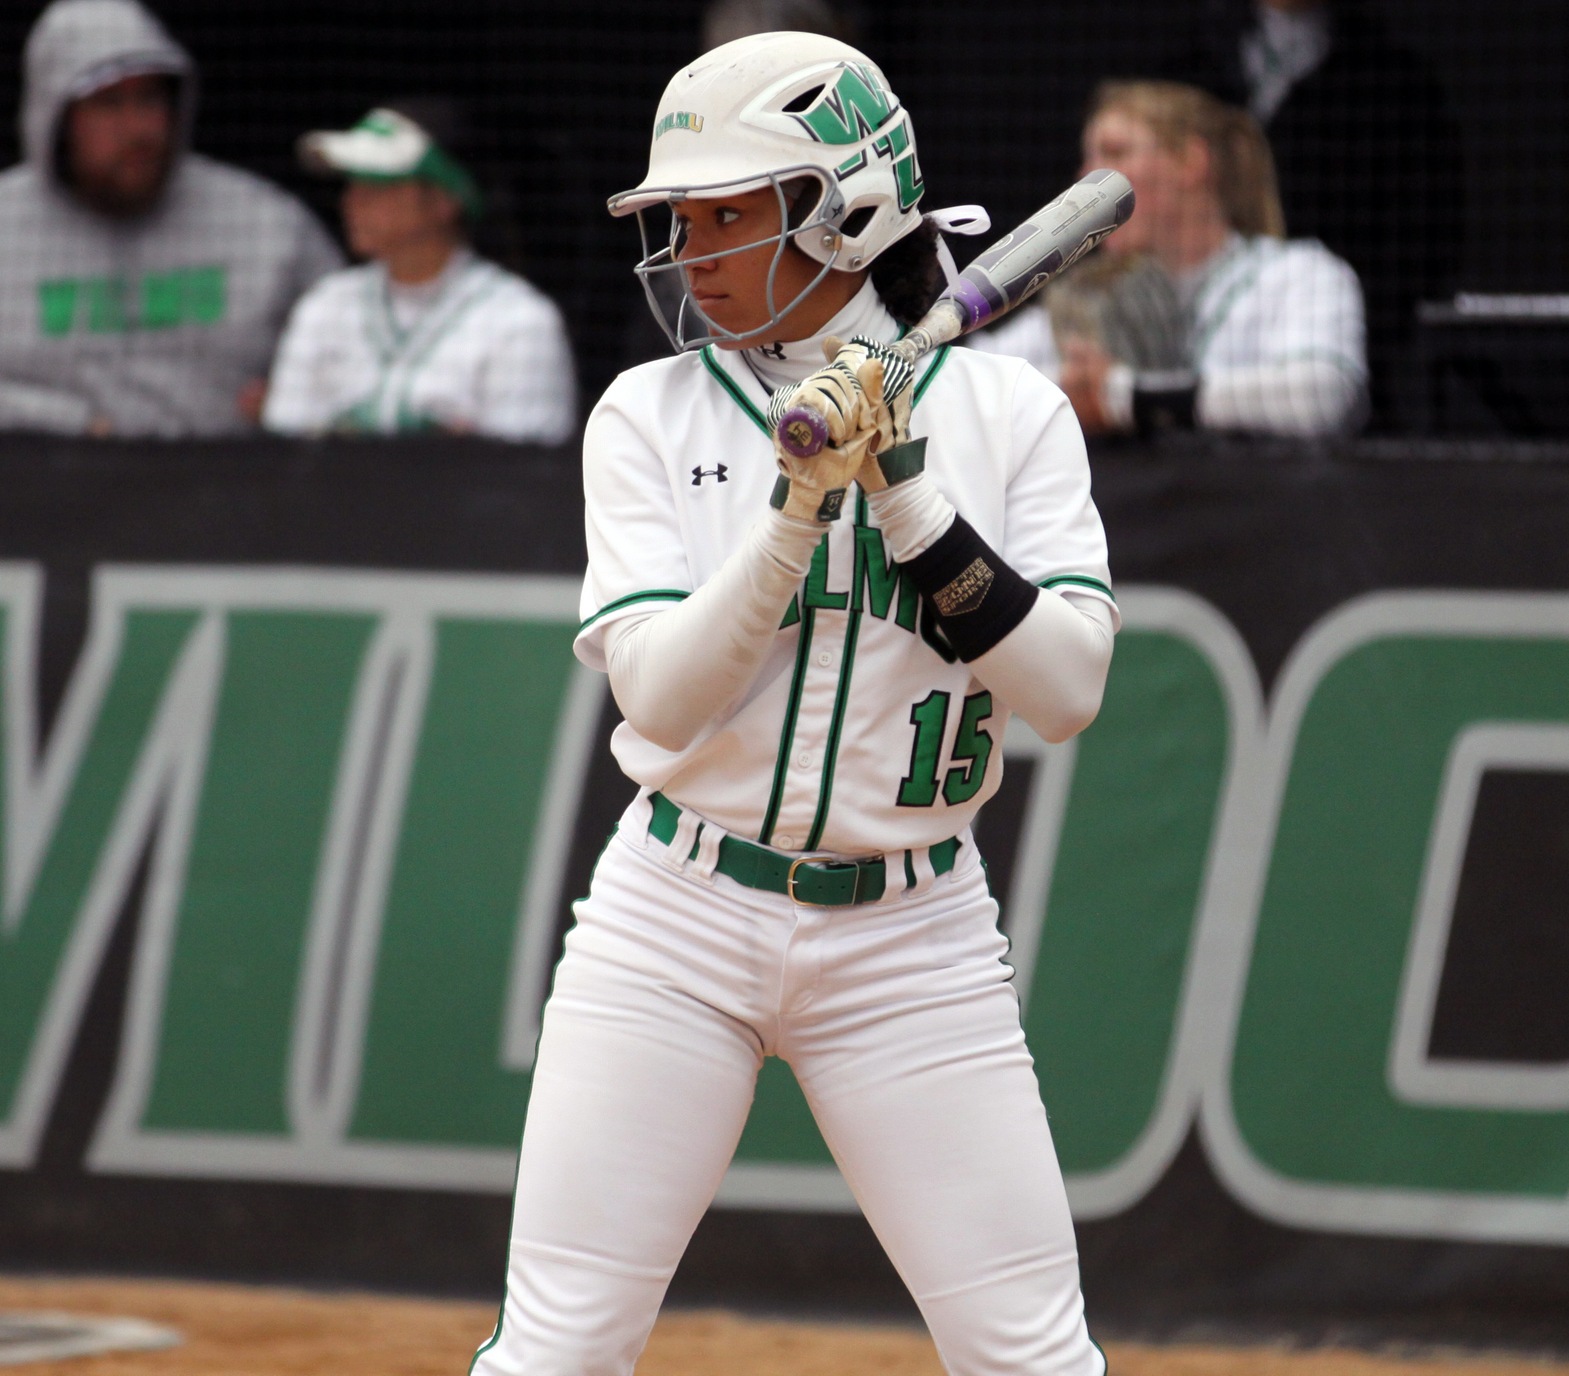 Copyright 2019; Wilmington University. All rights reserved. File photo of Kiana Broderson-Jones who went 1-for-4 with a two-run triple in game one, and 4-for-4 with a triple in game two at USciences. Photo by Katlynne Tubo.